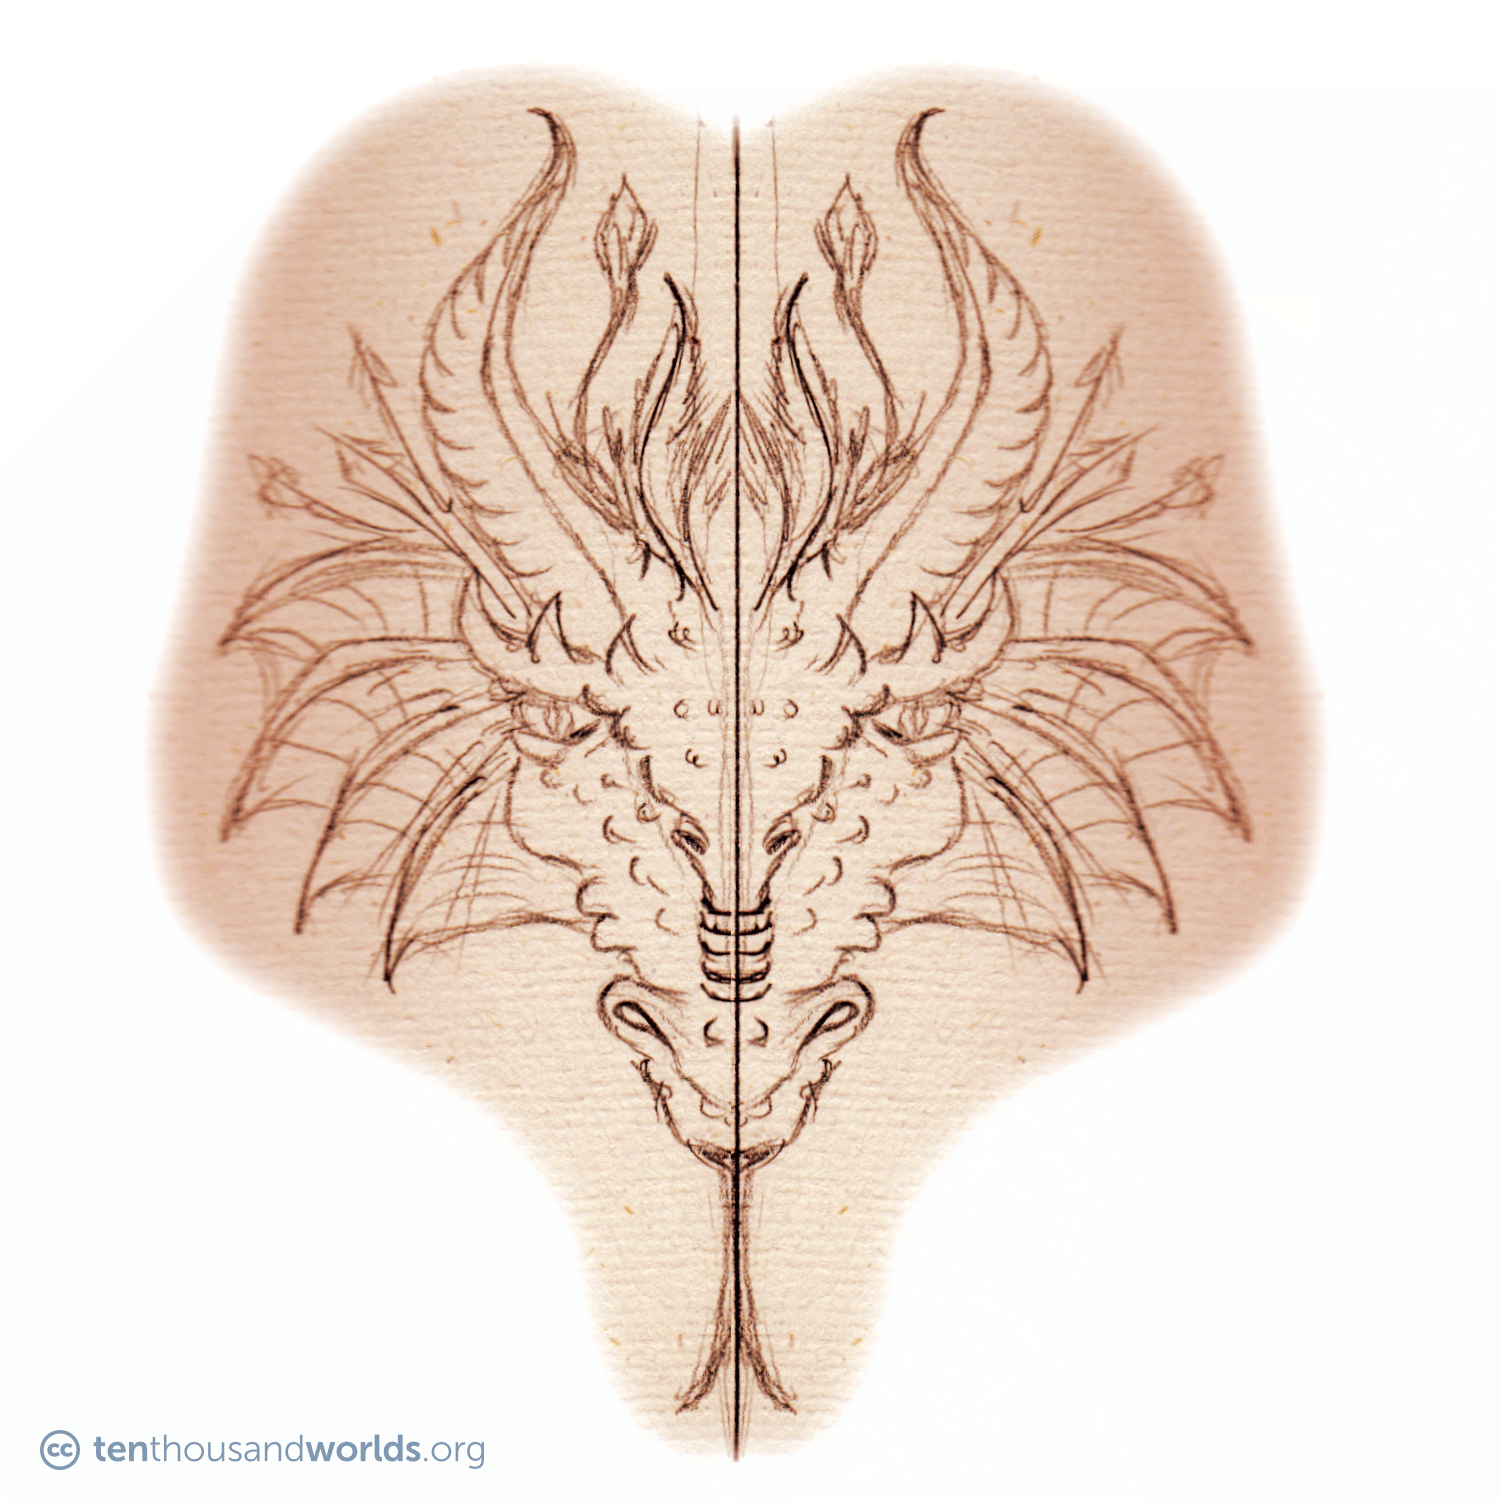 A pencil sketch of the head of a dragon, with back-swept curved horns, frills, feathers, and a forked tongue.